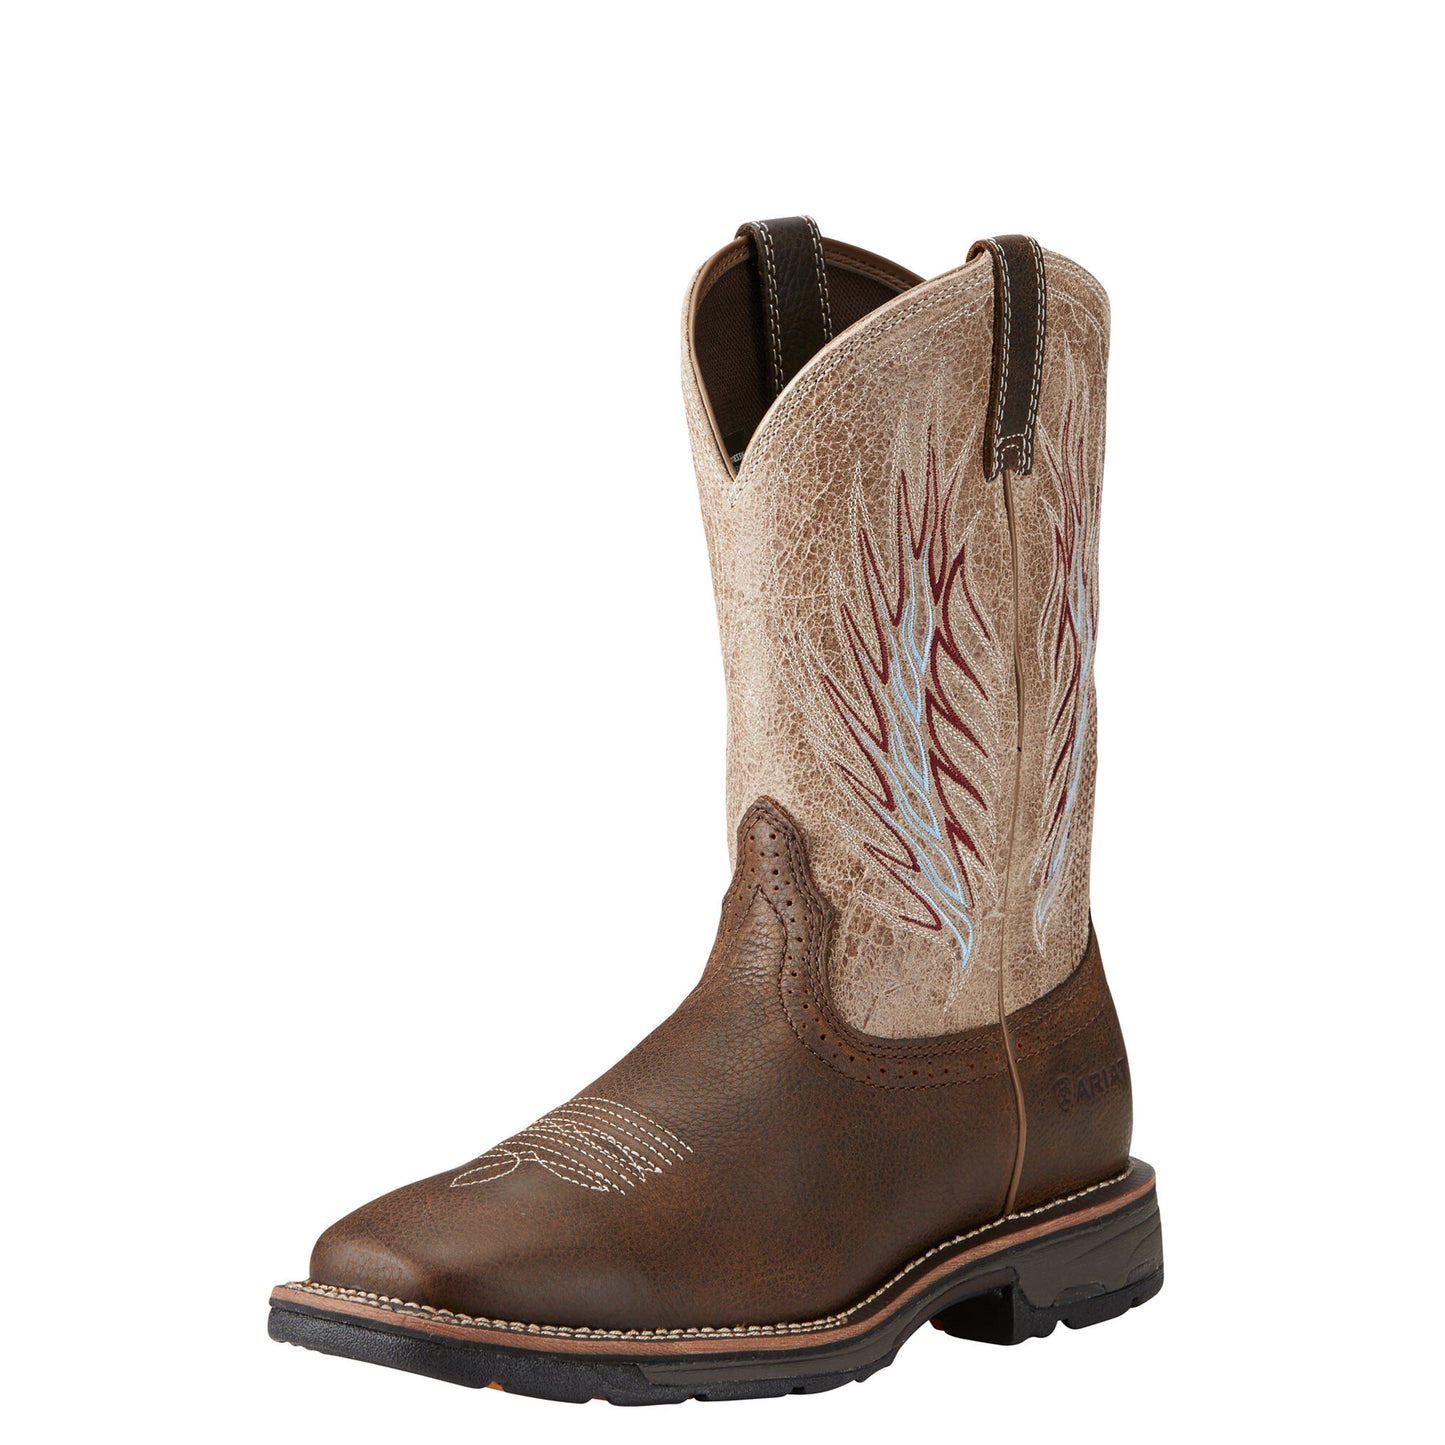 Ariat Men's WorkHog Mesteno II Boot - Rustic Brown/Stone - French's Boots